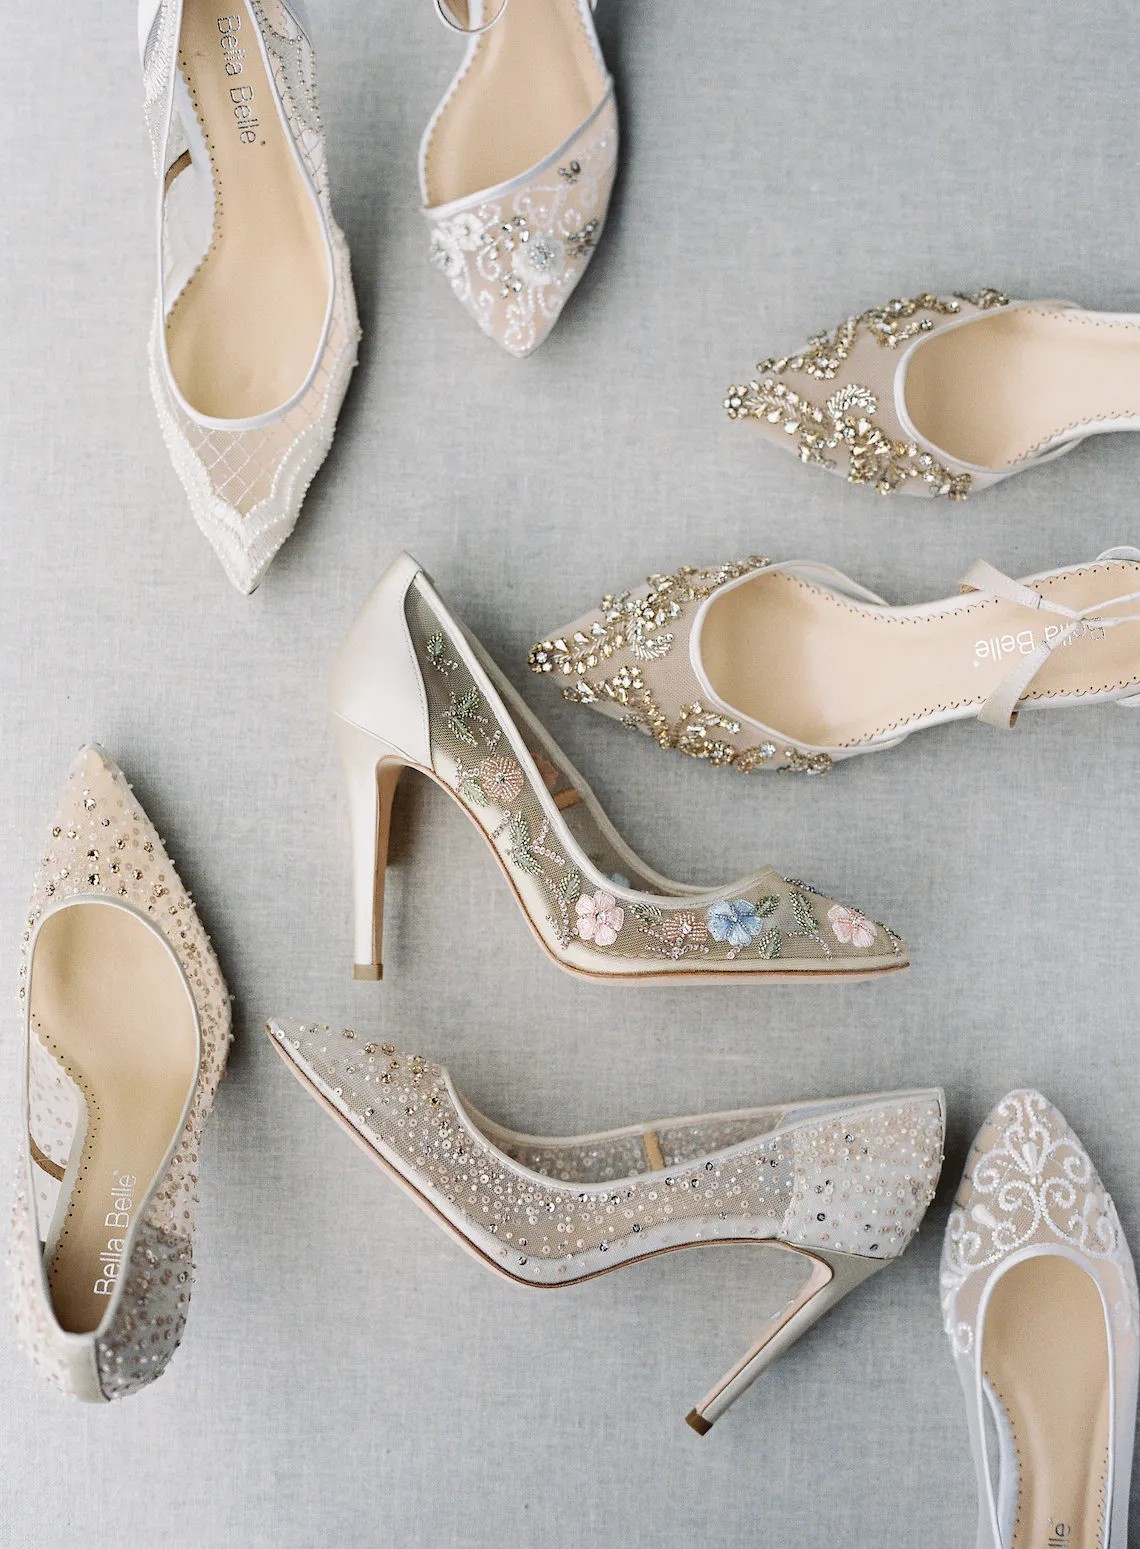 You’re Not Limited To One Wedding Shoe